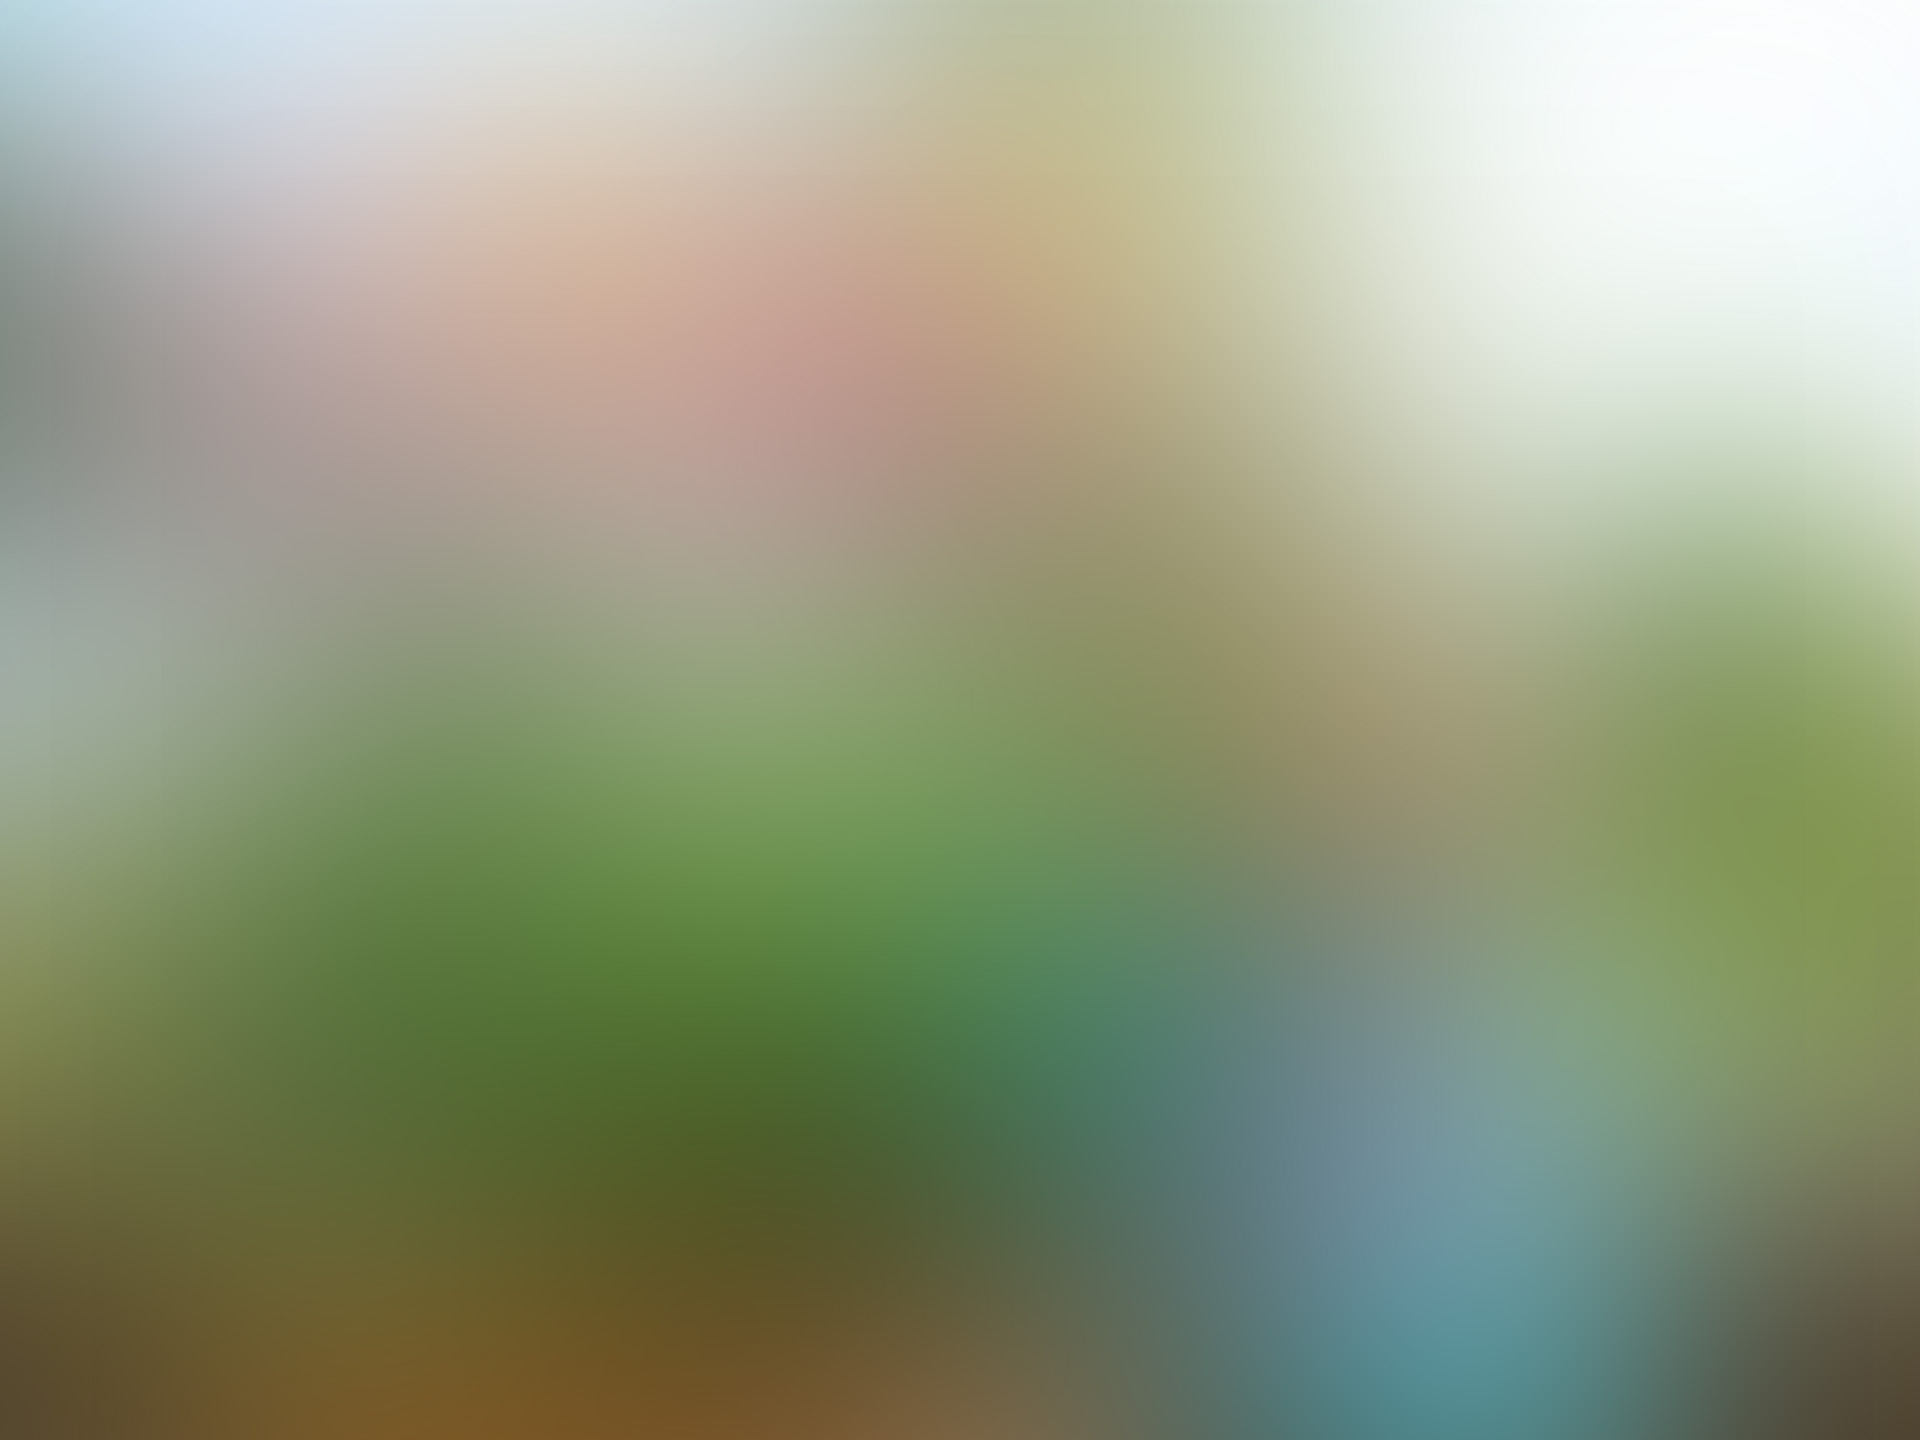 Collection Of 10 Free High Quality Blurred Backgrounds IAN BARNARD